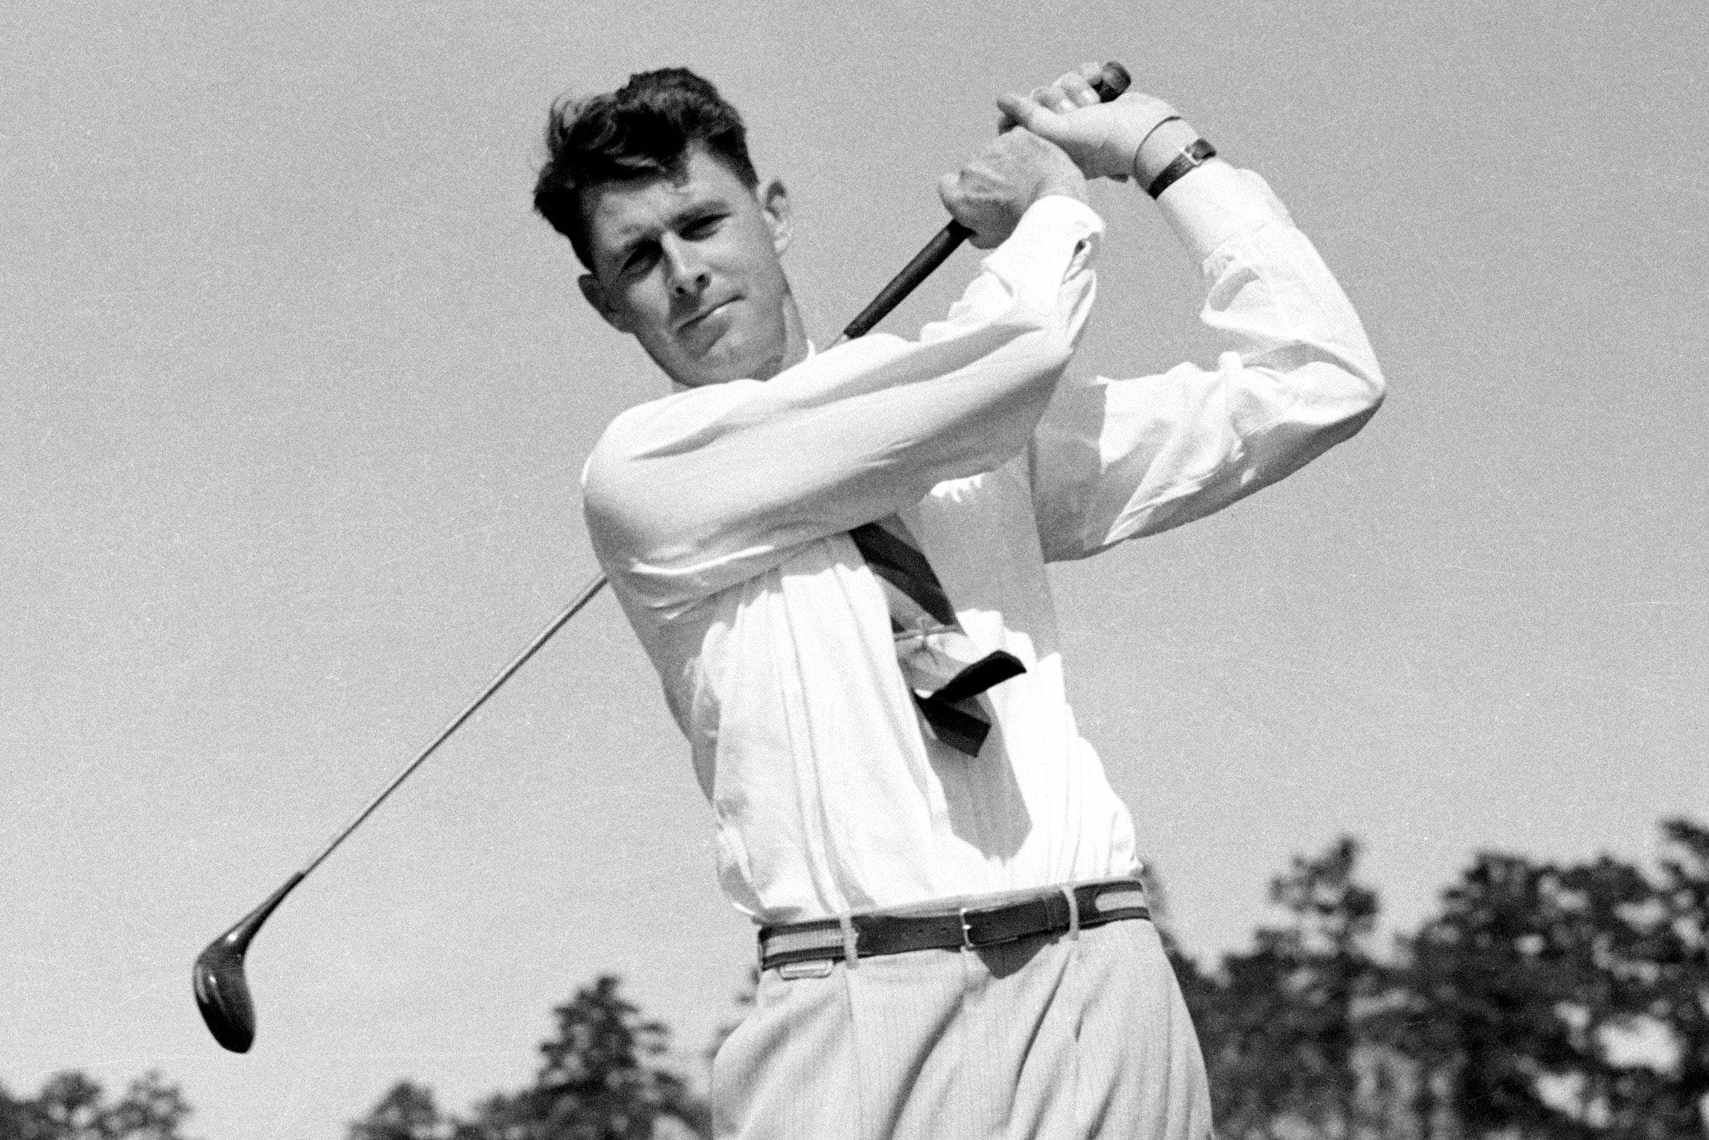 Horton Smith swings a golf club at the 1934 Augusta National golf tournament